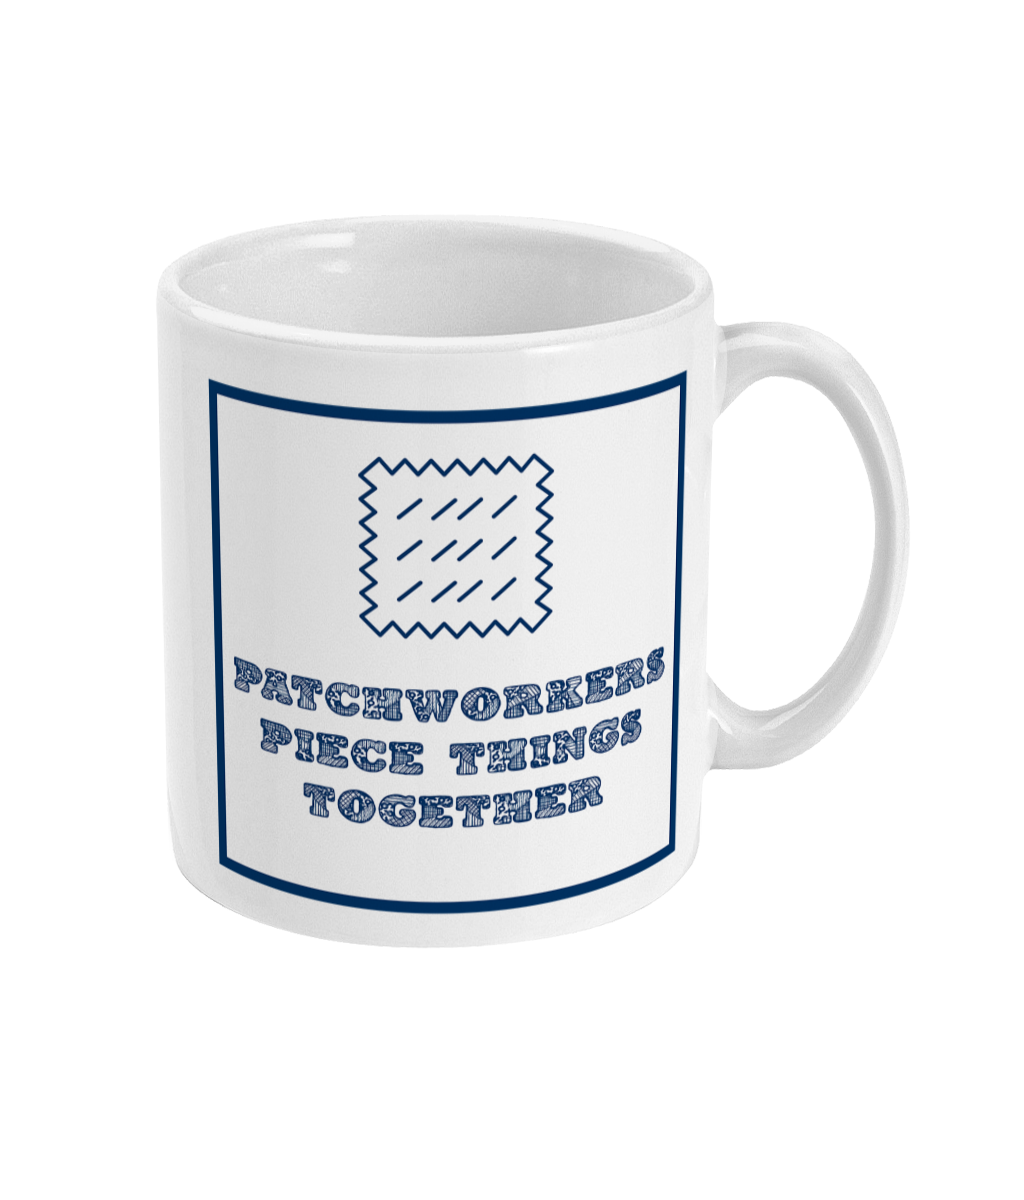 mug with text patchworkers piece things together on it